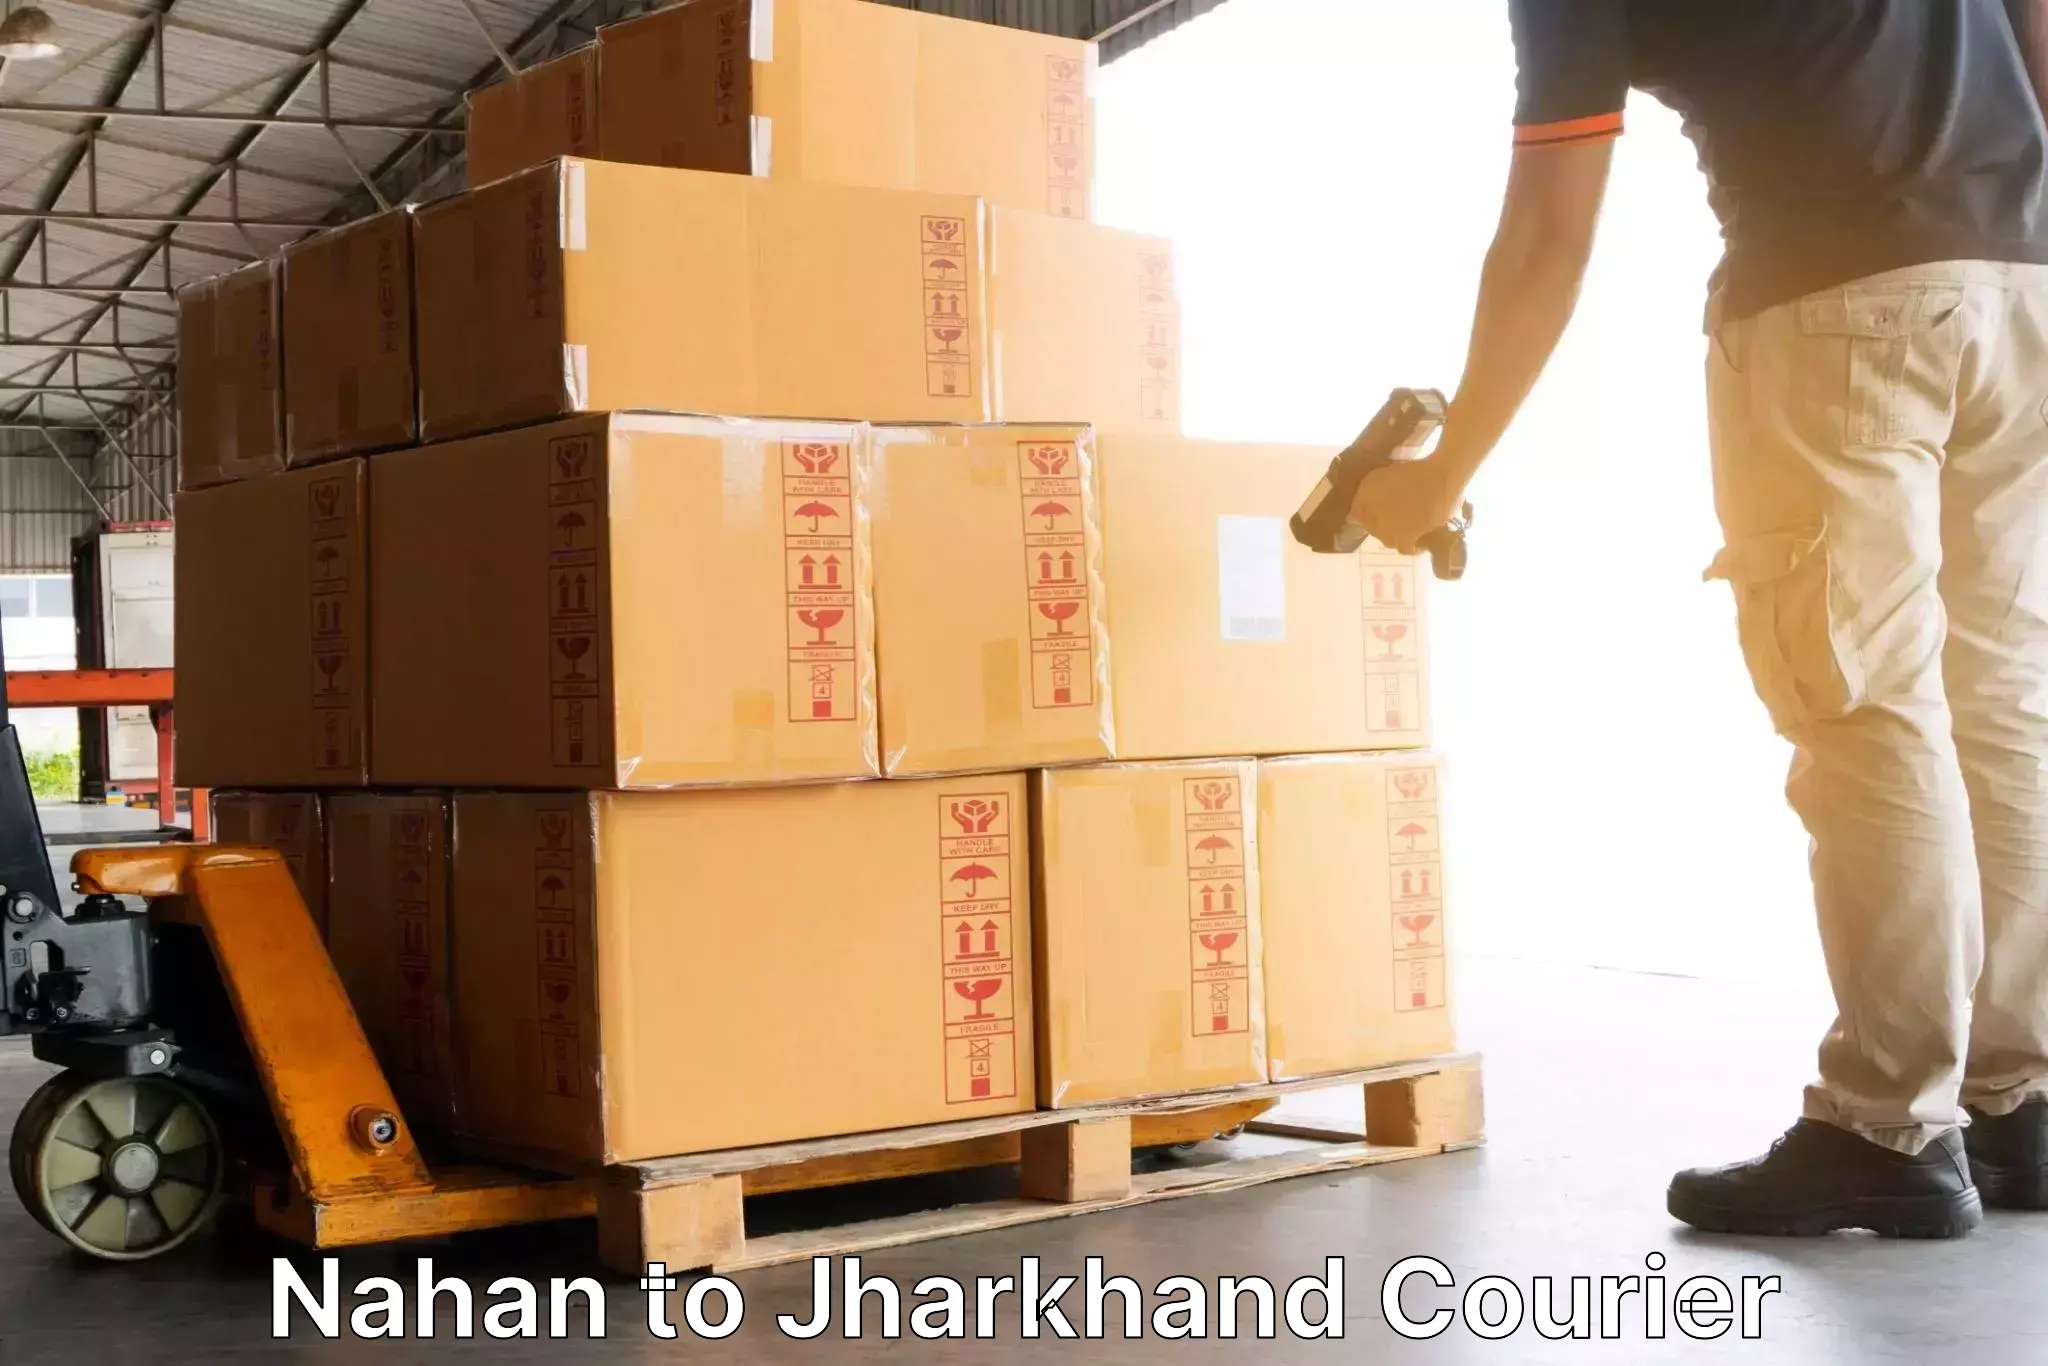 Courier membership in Nahan to Ranchi